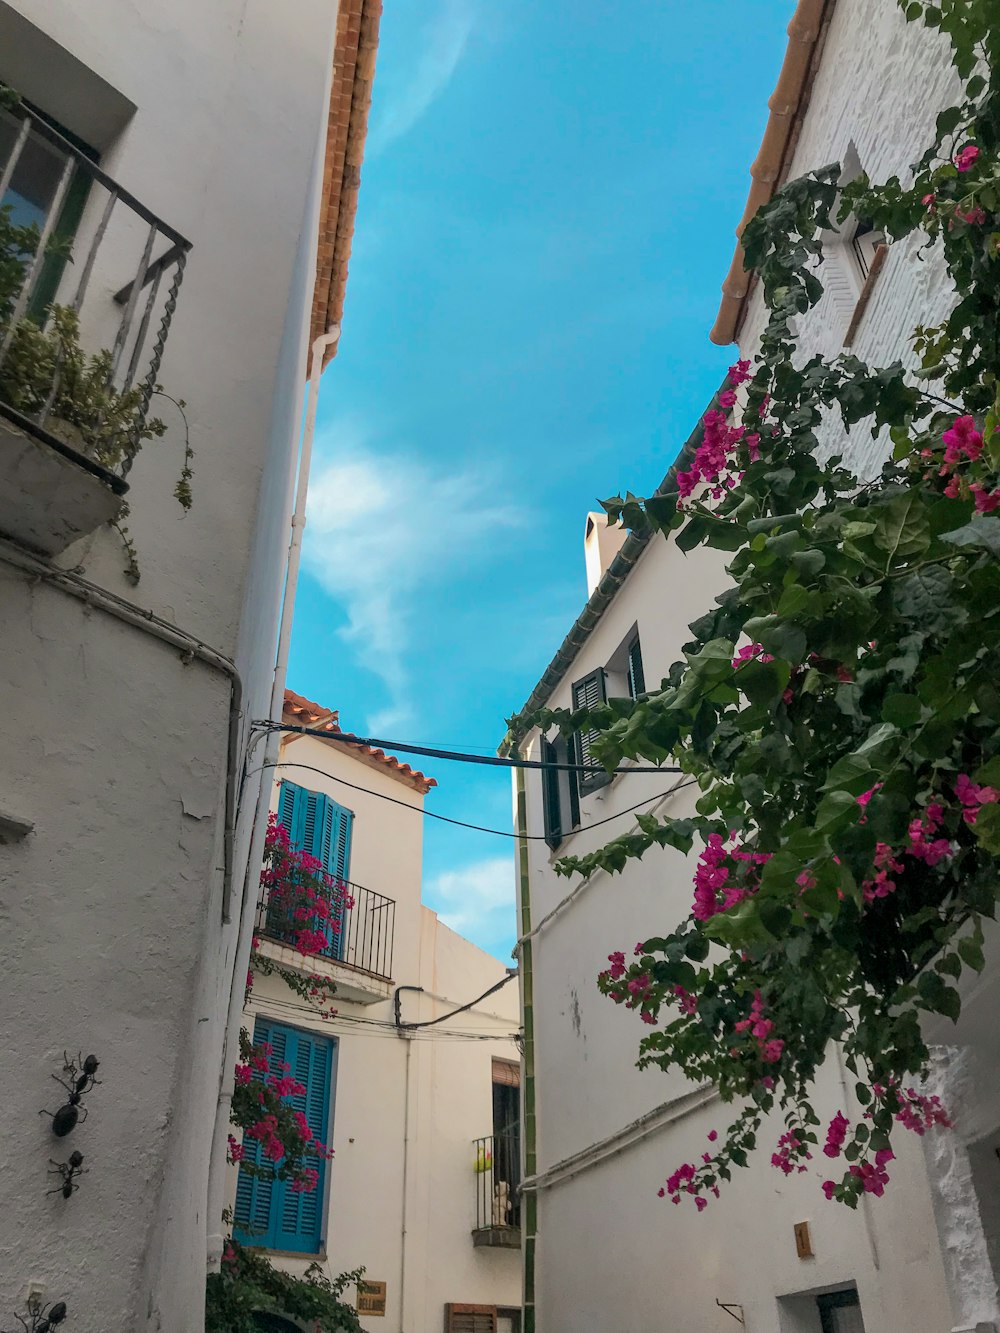 a narrow alleyway with white buildings and pink flowers